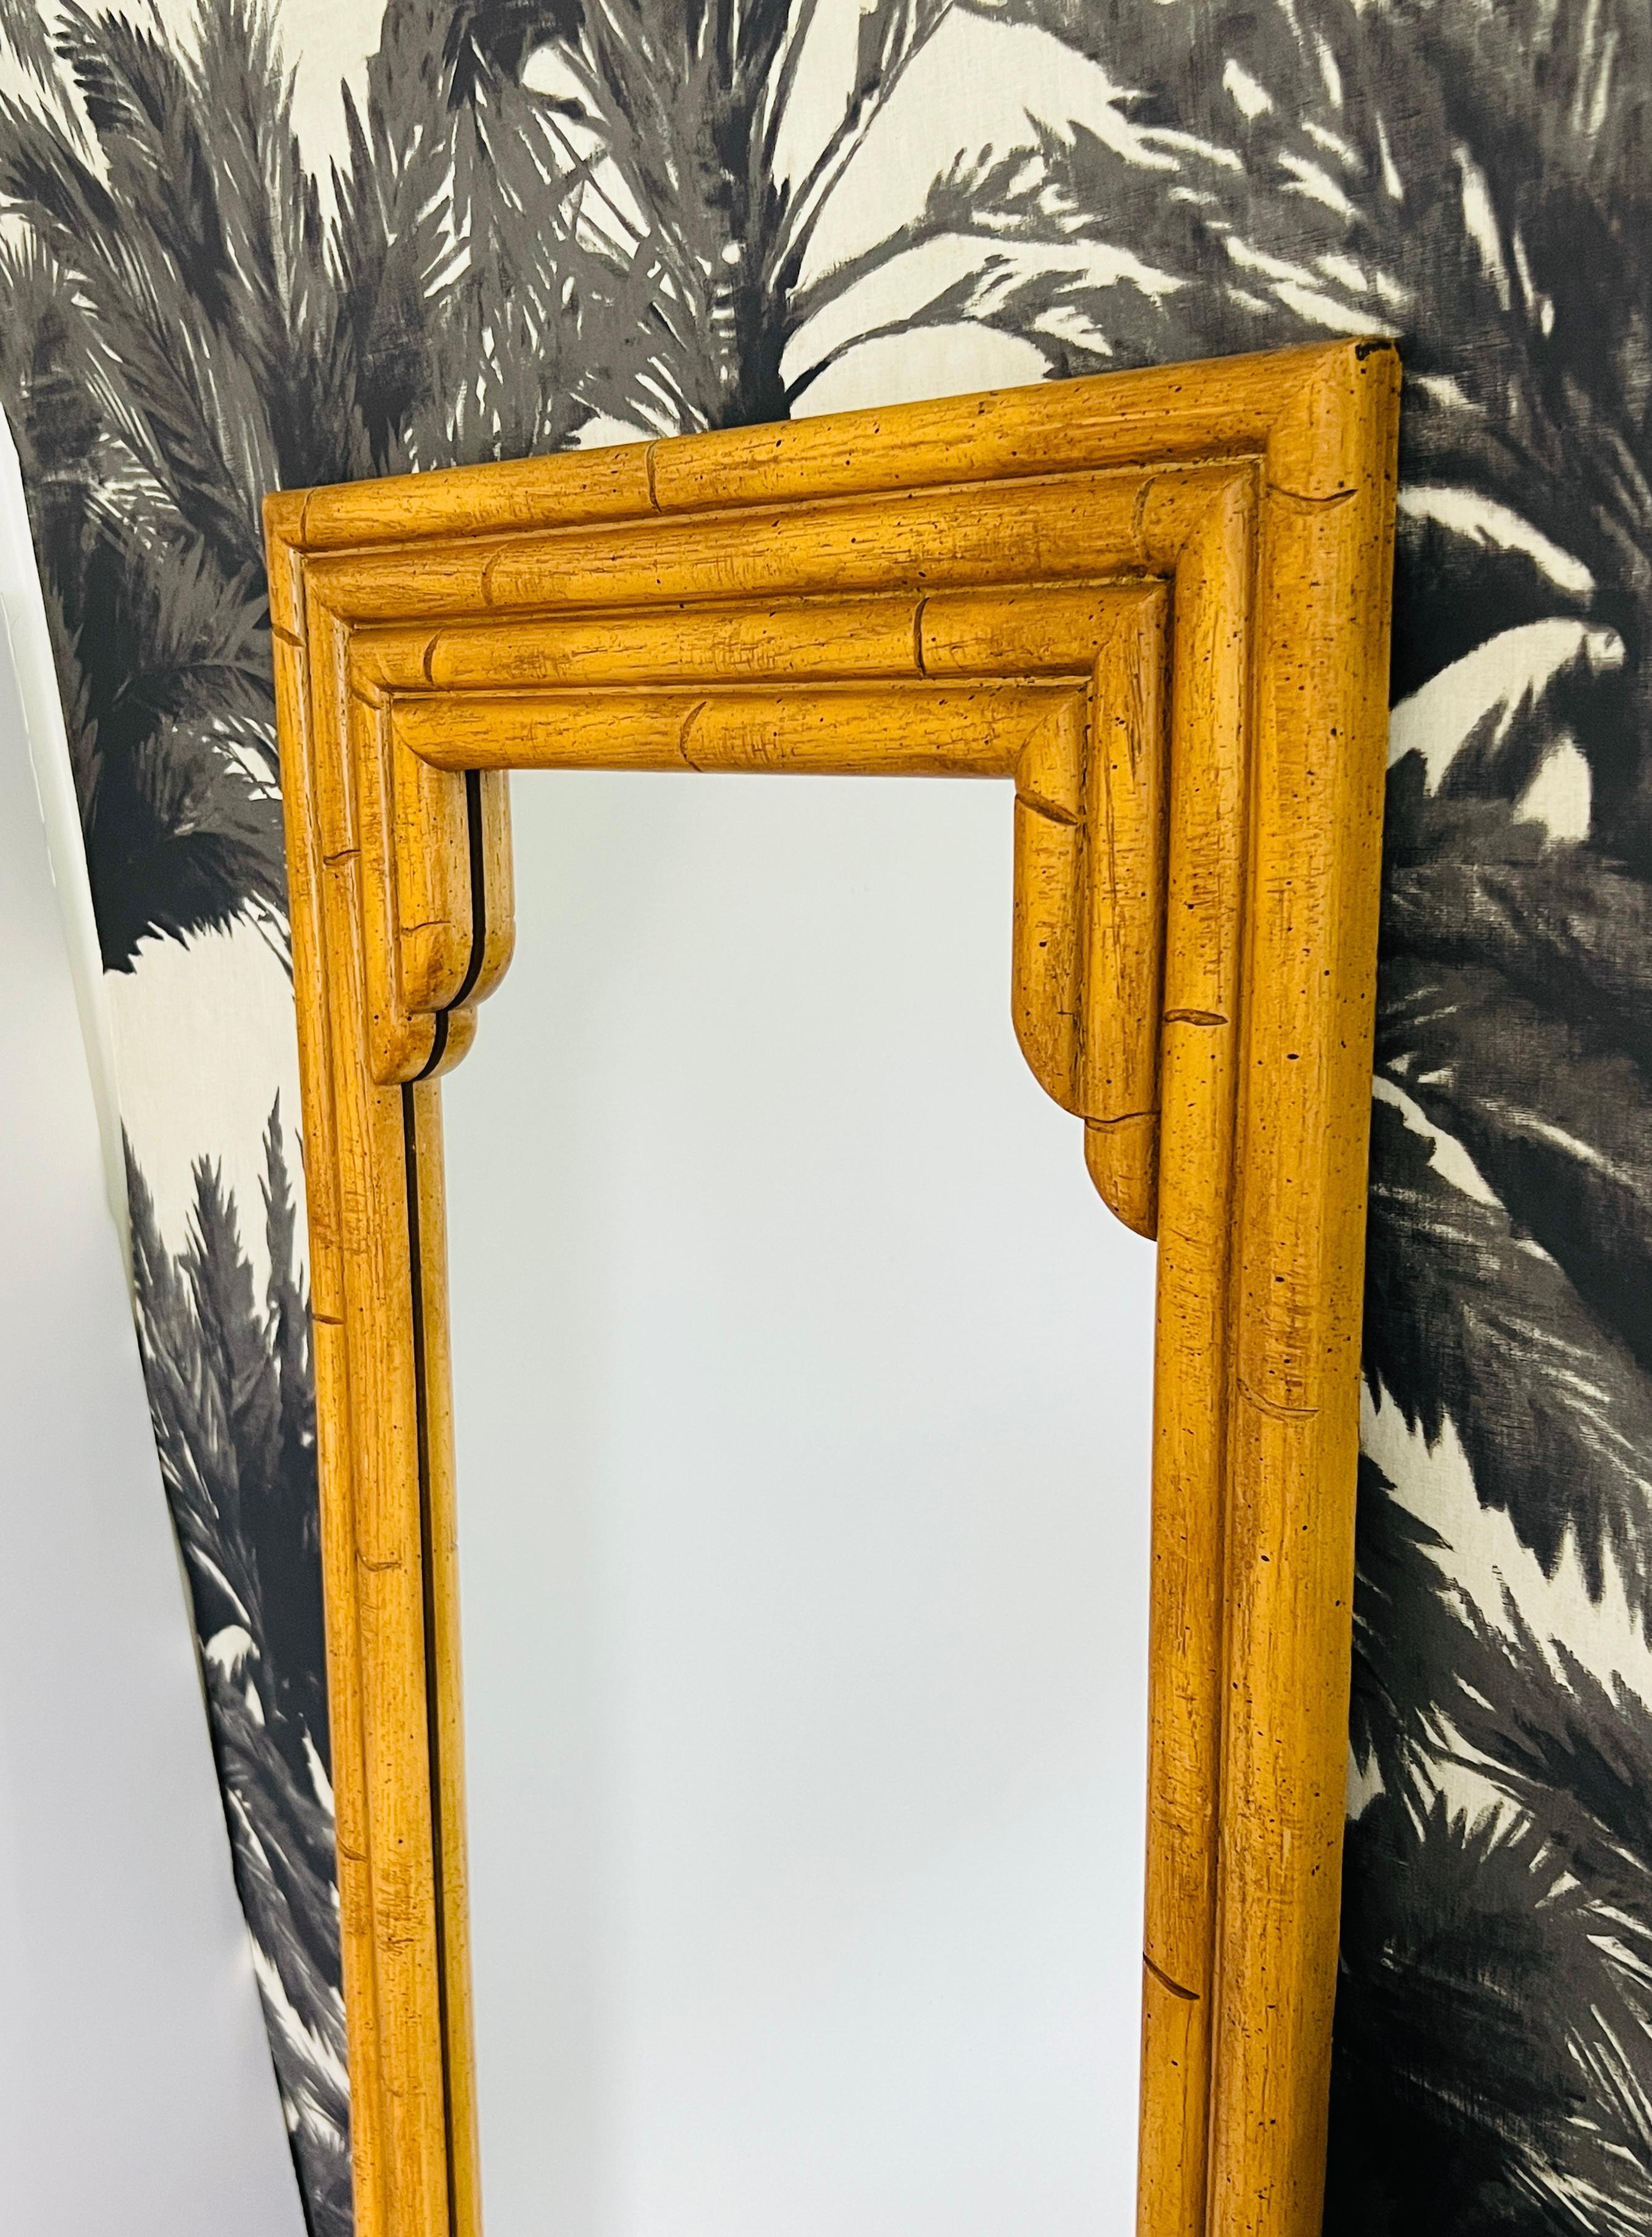 Pair of Pagoda Bamboo Mirrors In Wood and Resin, c. 1970's For Sale 2